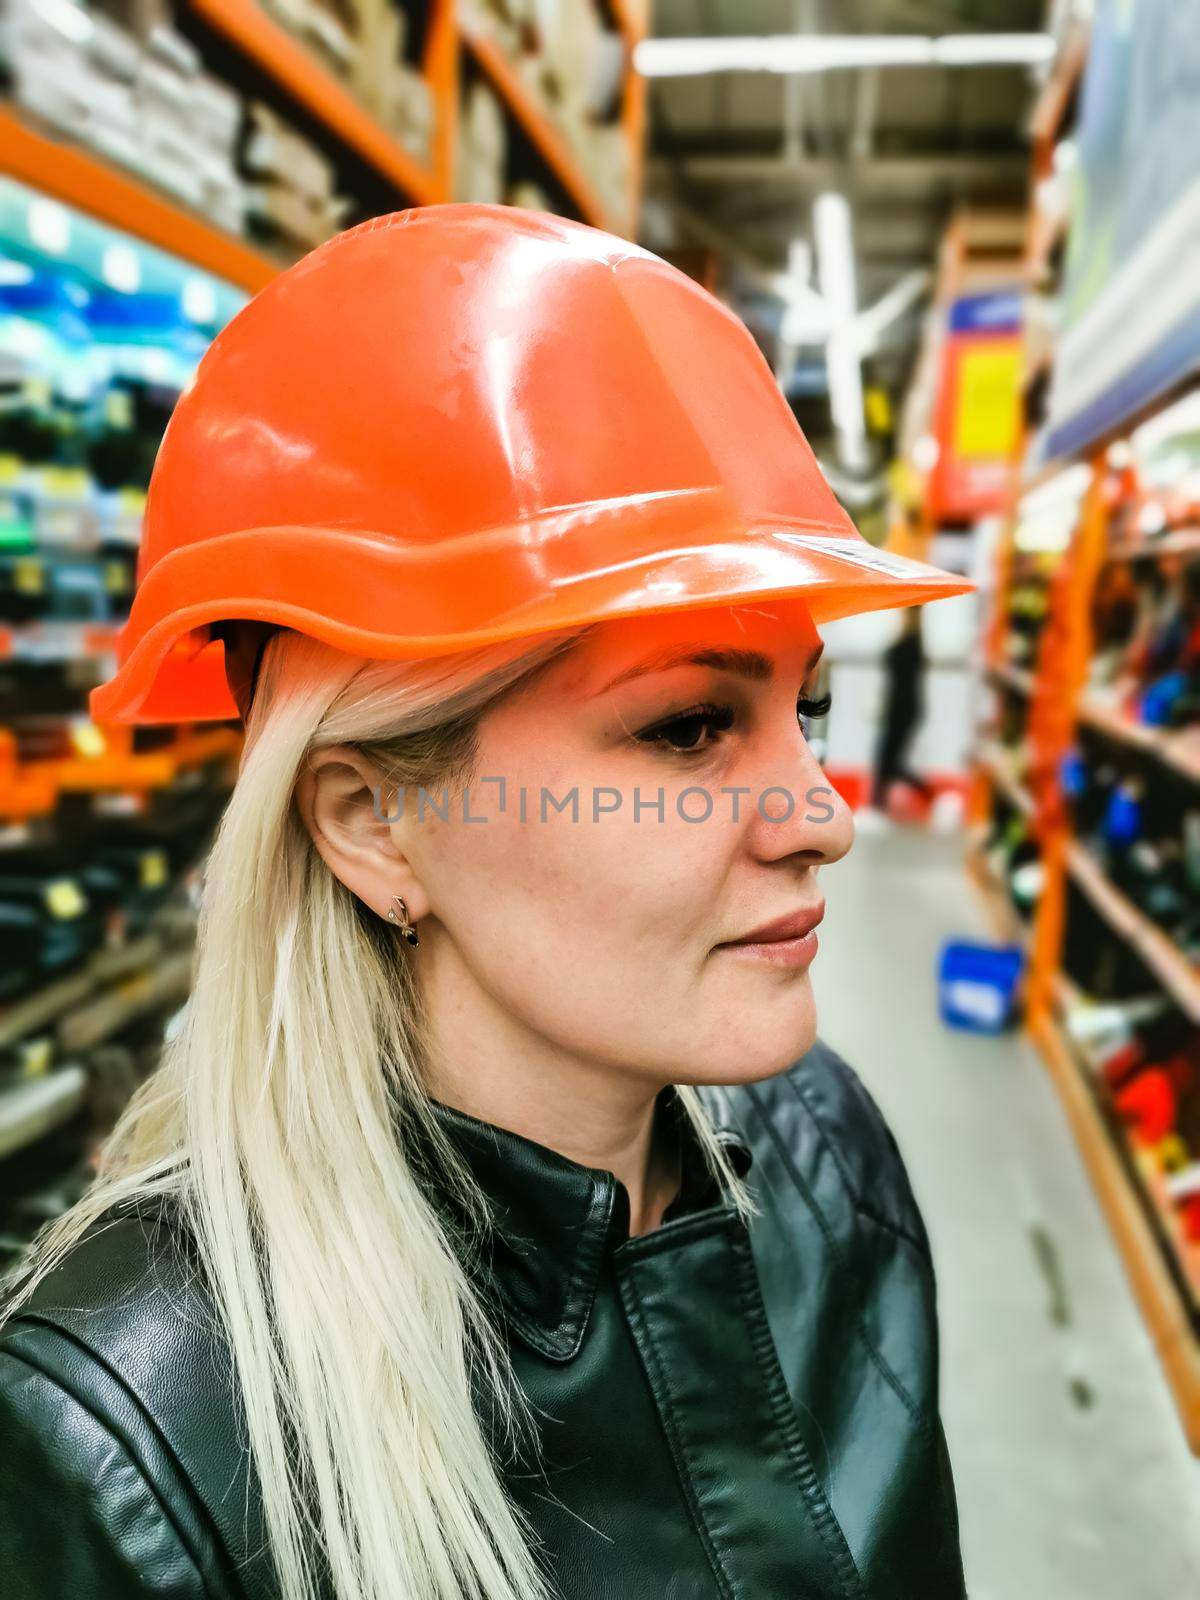 a woman measures a helmet in a store by Andelov13